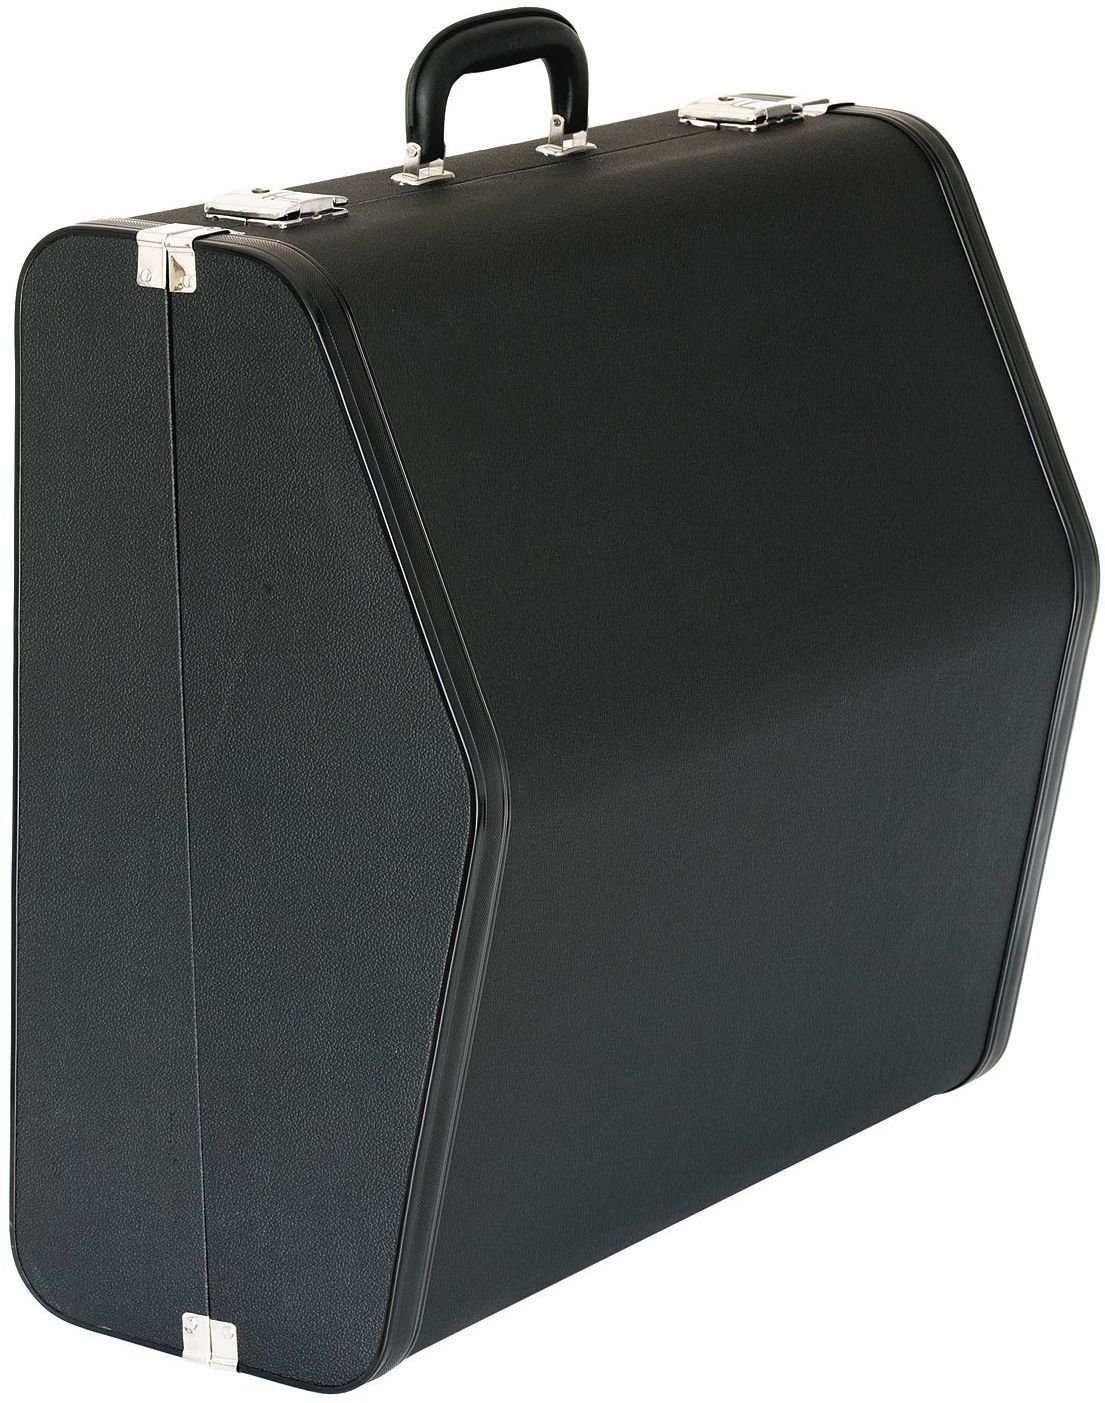 Case for Accordion Weltmeister 30/60/III Kristall HC BK Case for Accordion